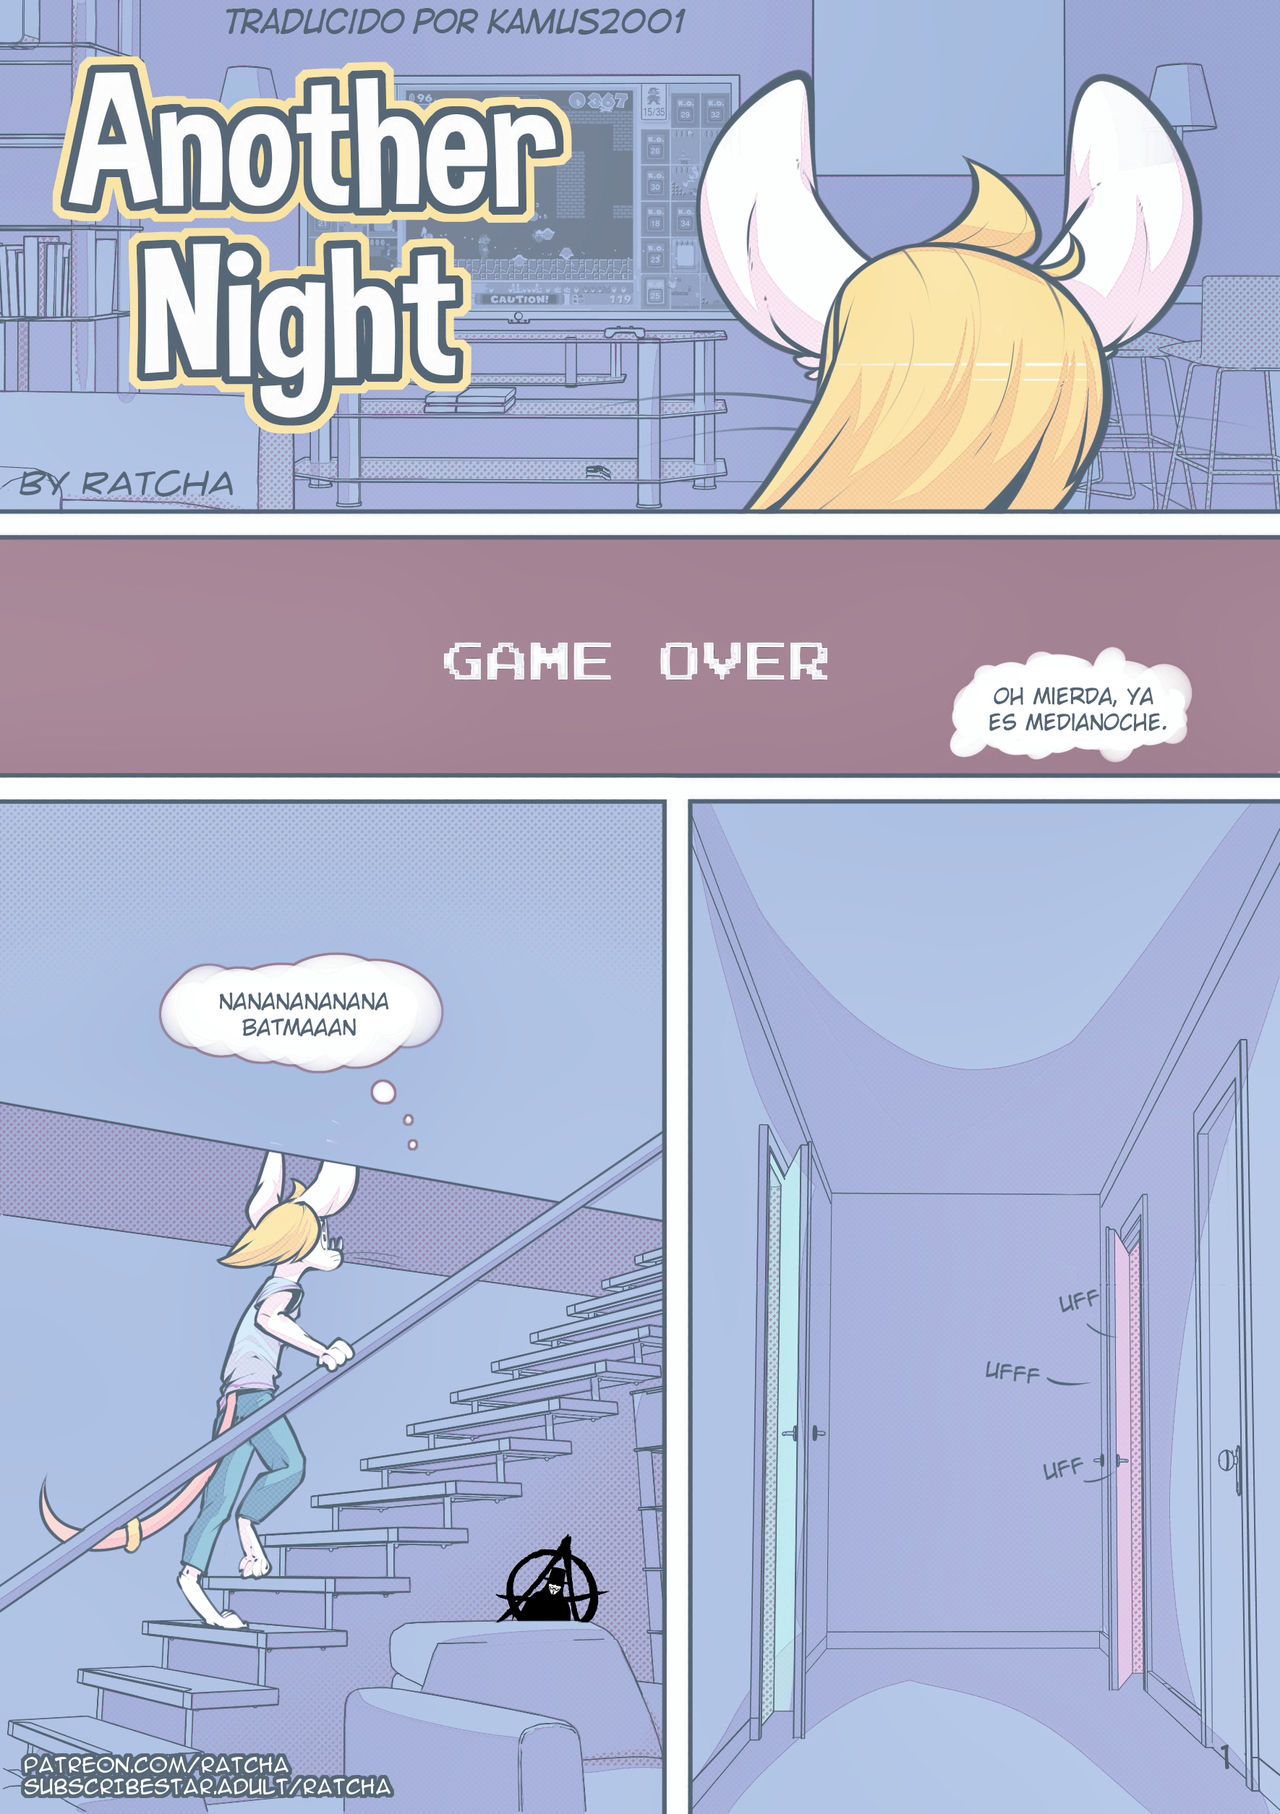 [Ratcha] Another Night (Parte 2: Ongoing) [Spanish] [Kamus2001] 1